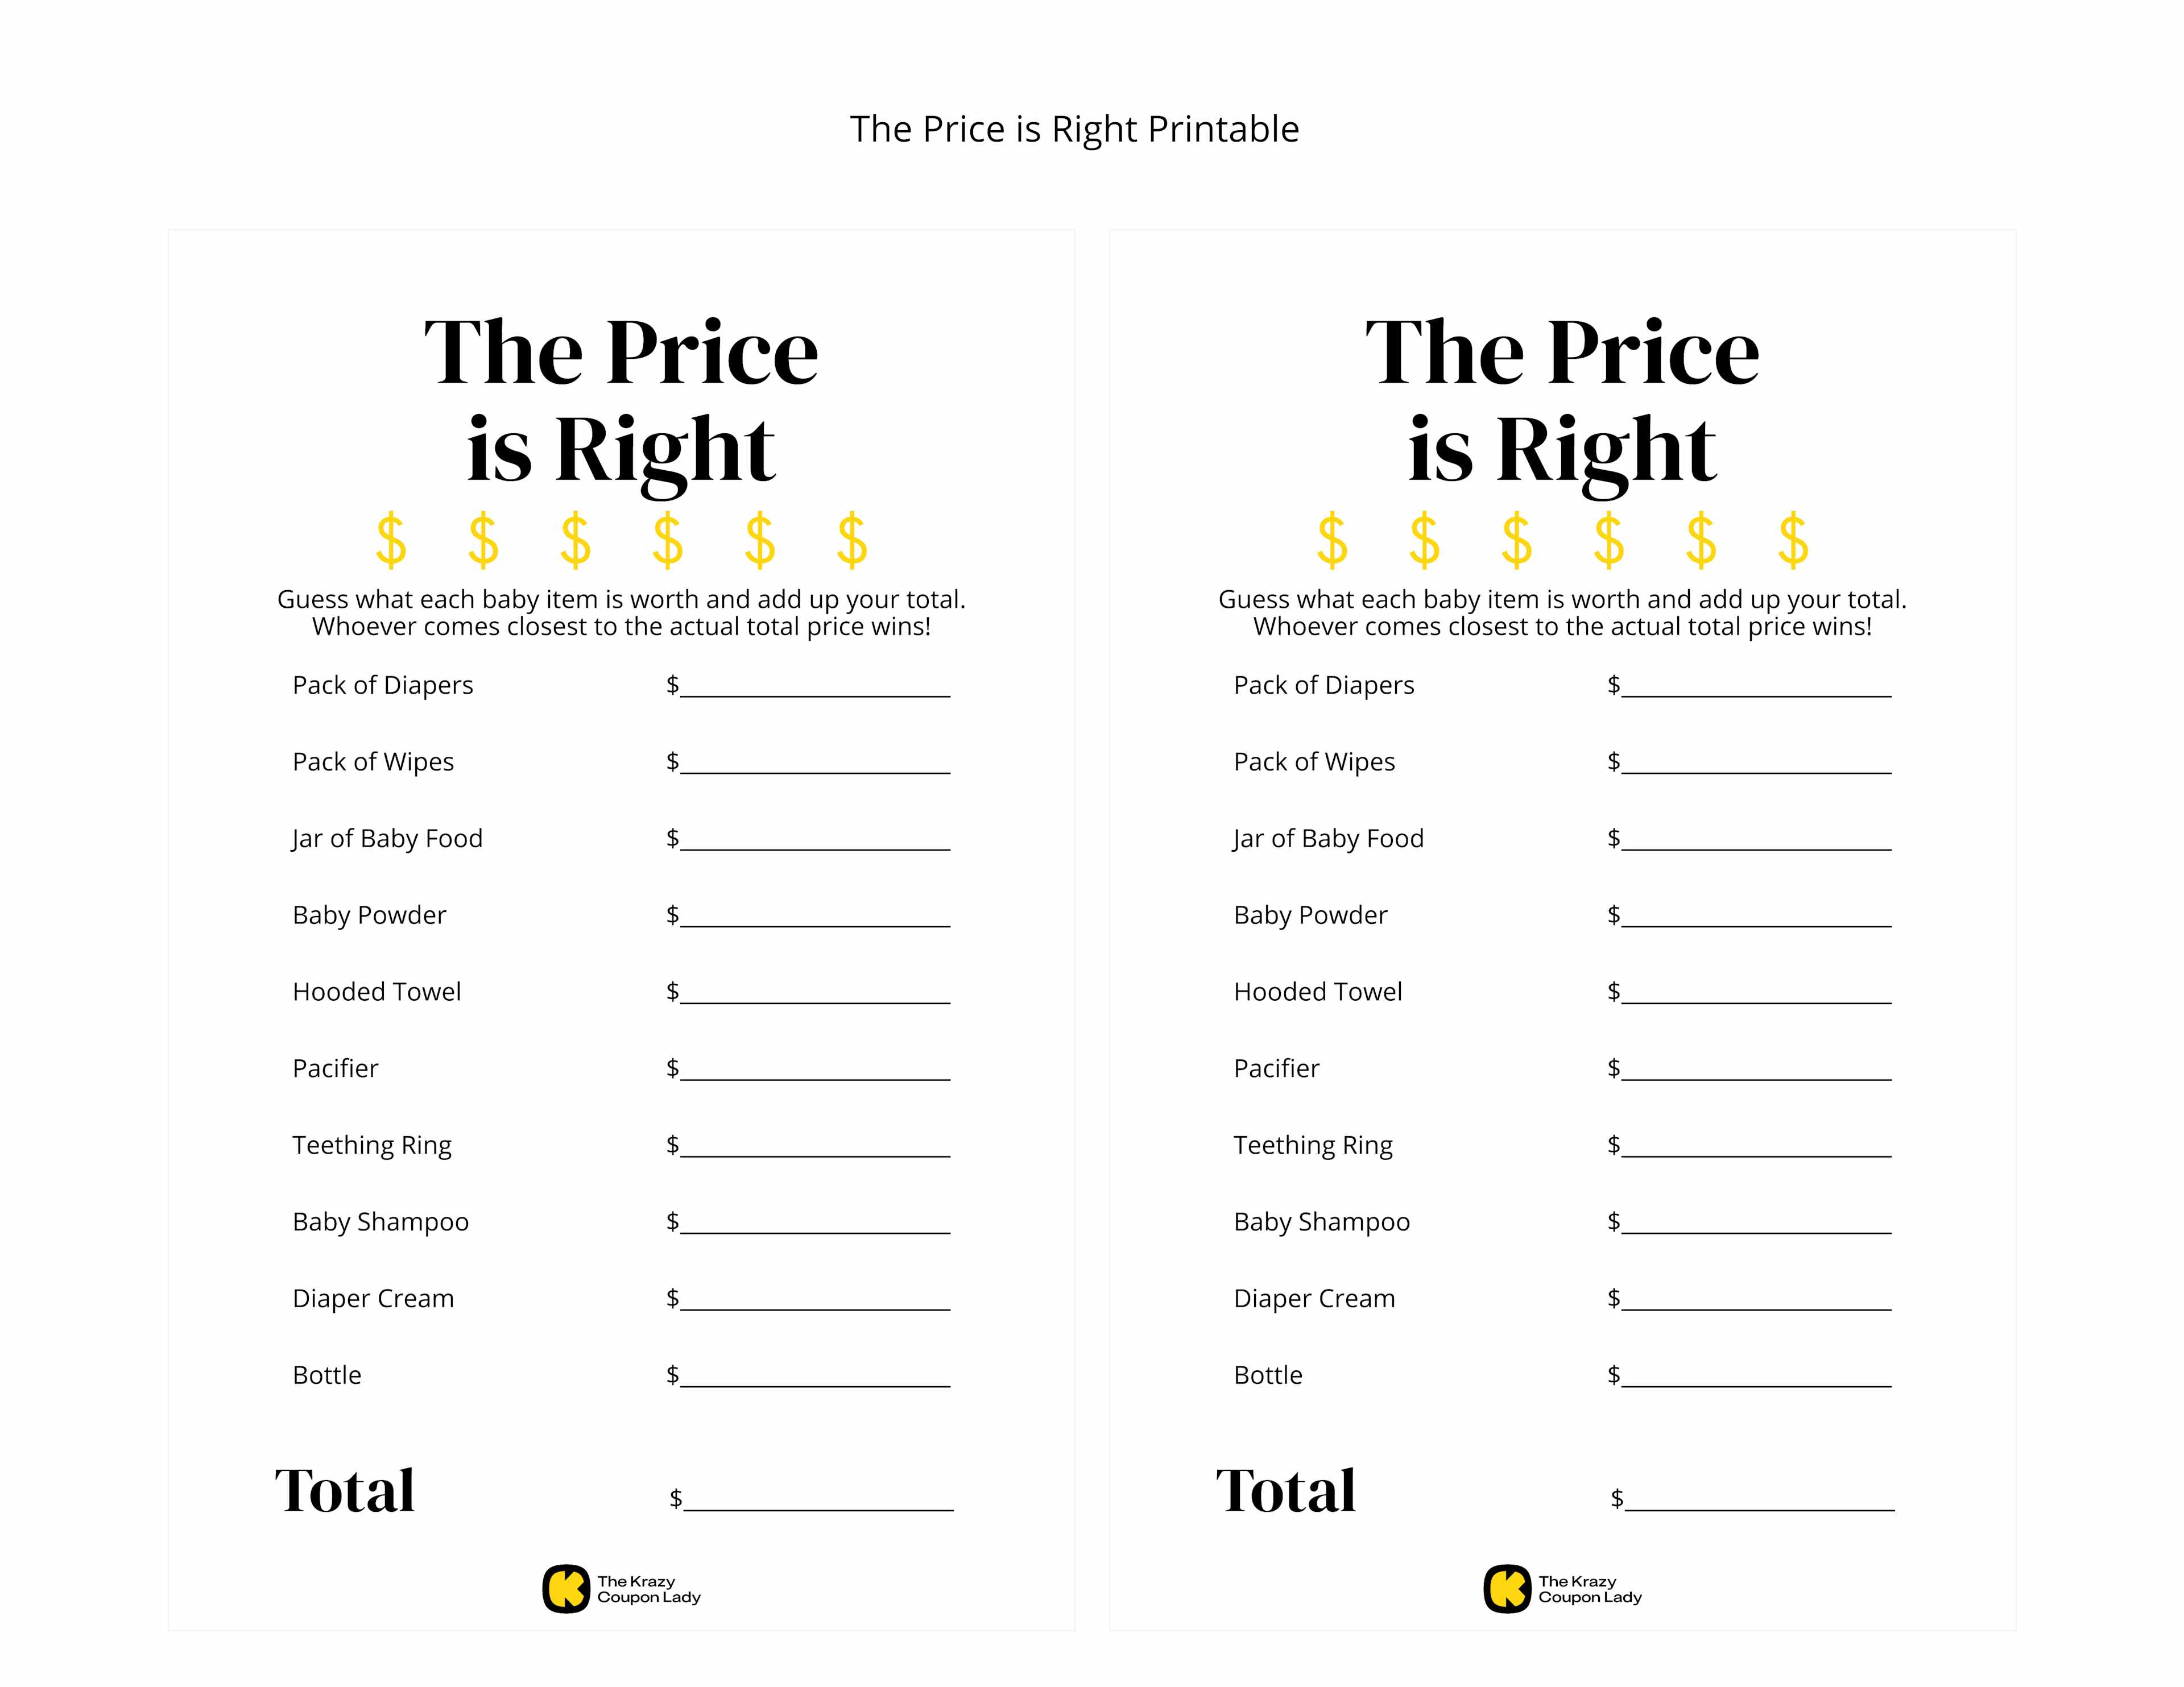 The Price is Right printable game